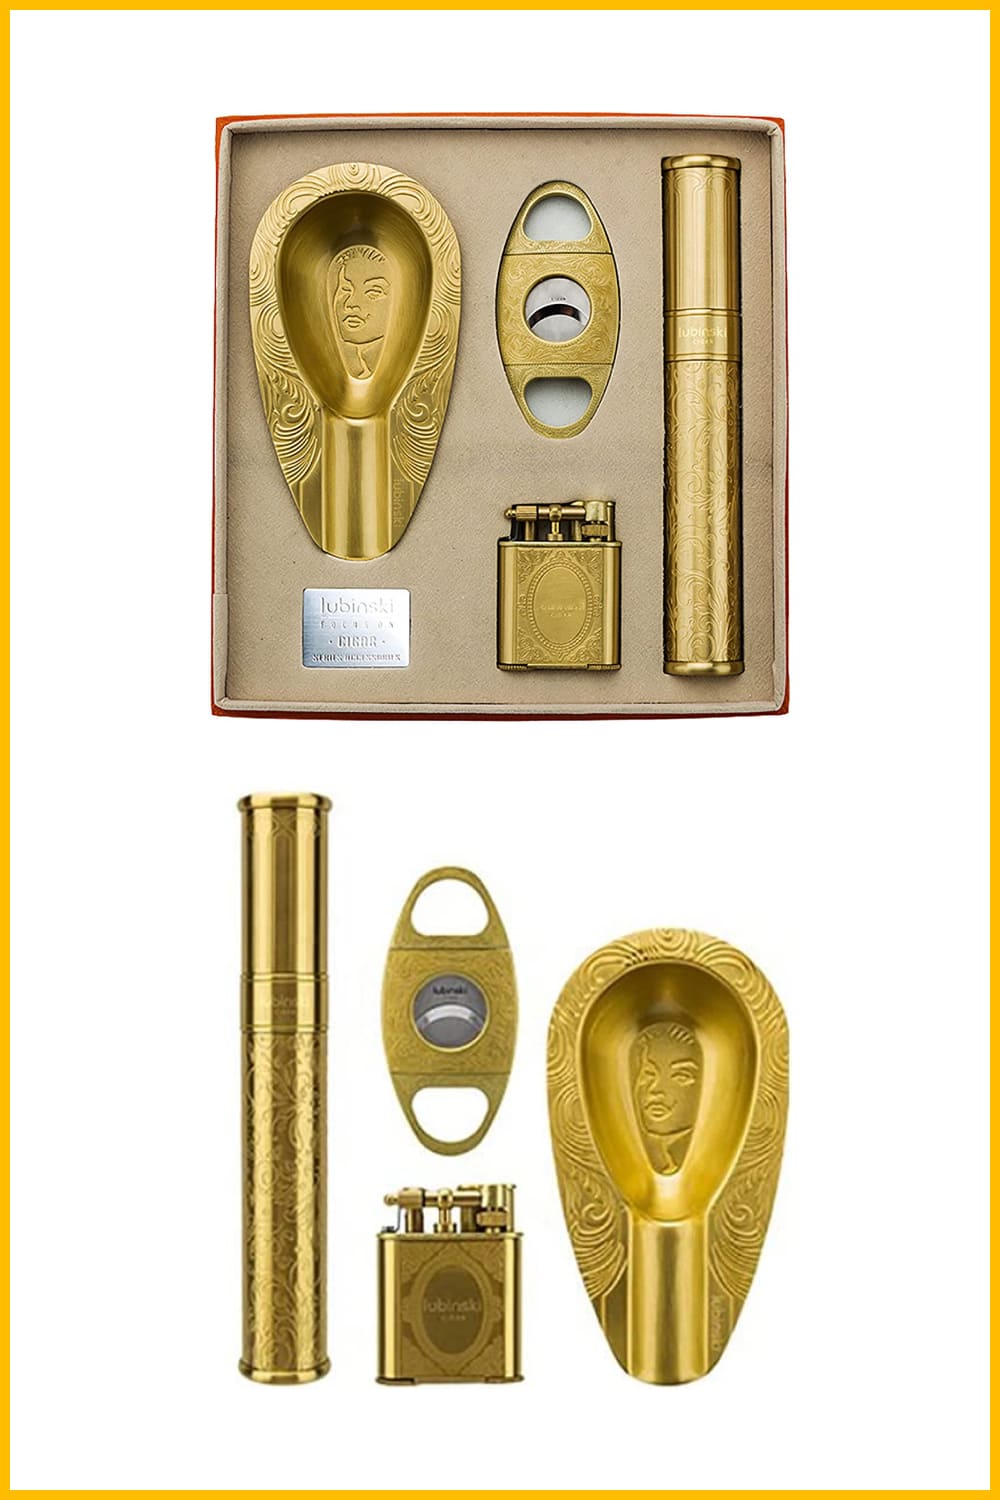 A set of accessories in gold color for cigars.